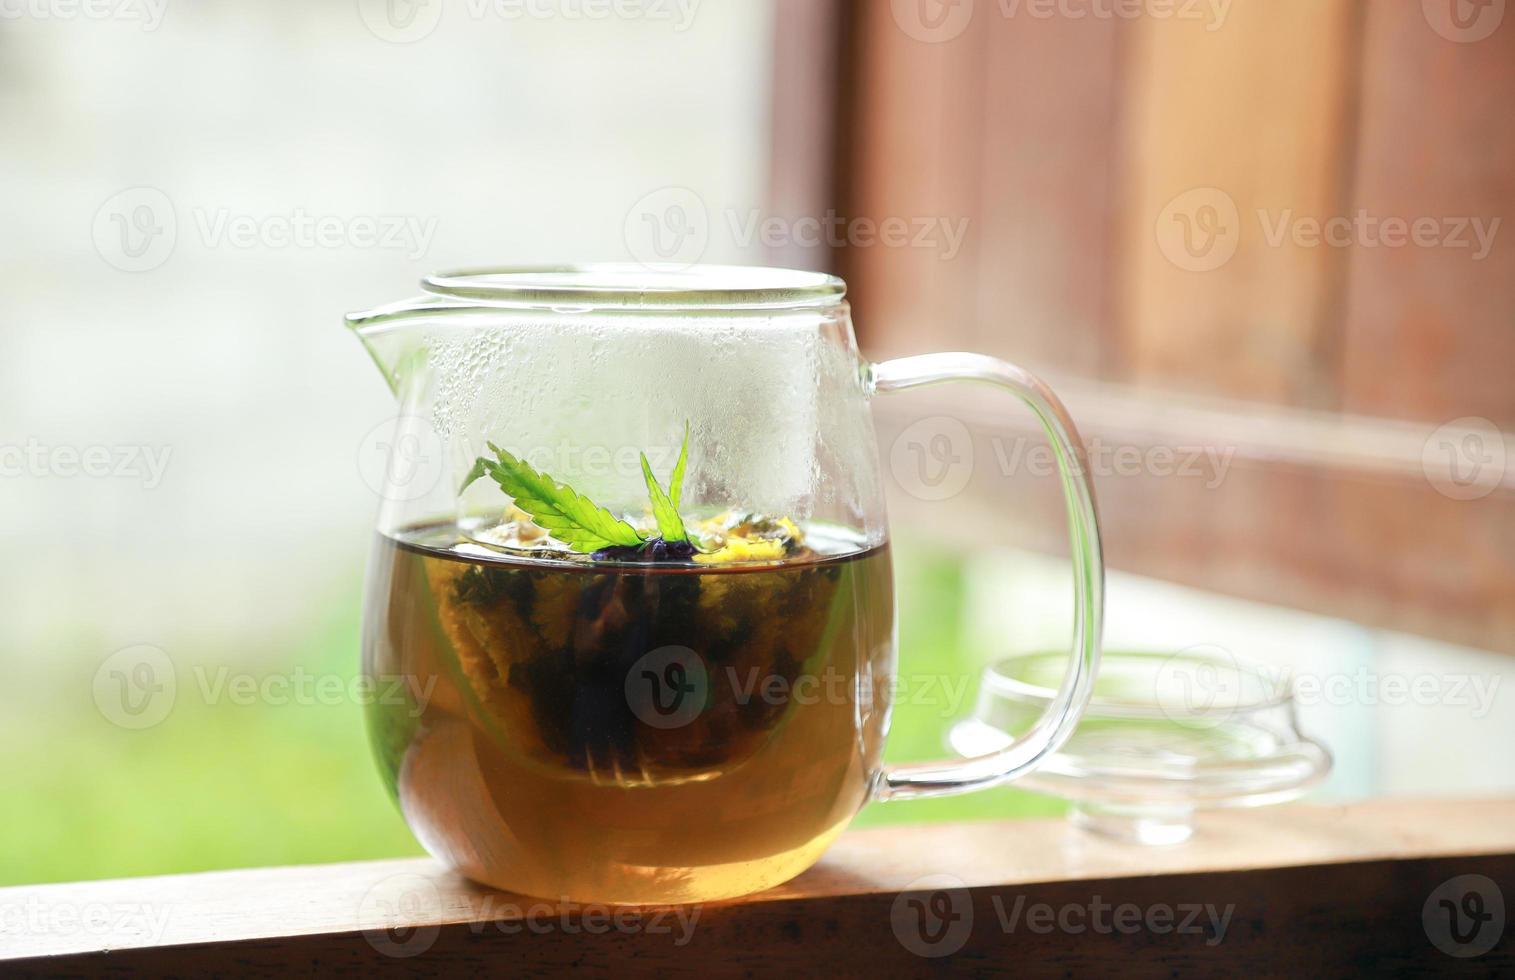 flowers tea in glass jar with cannabis leaf for healthy aroma drinking photo